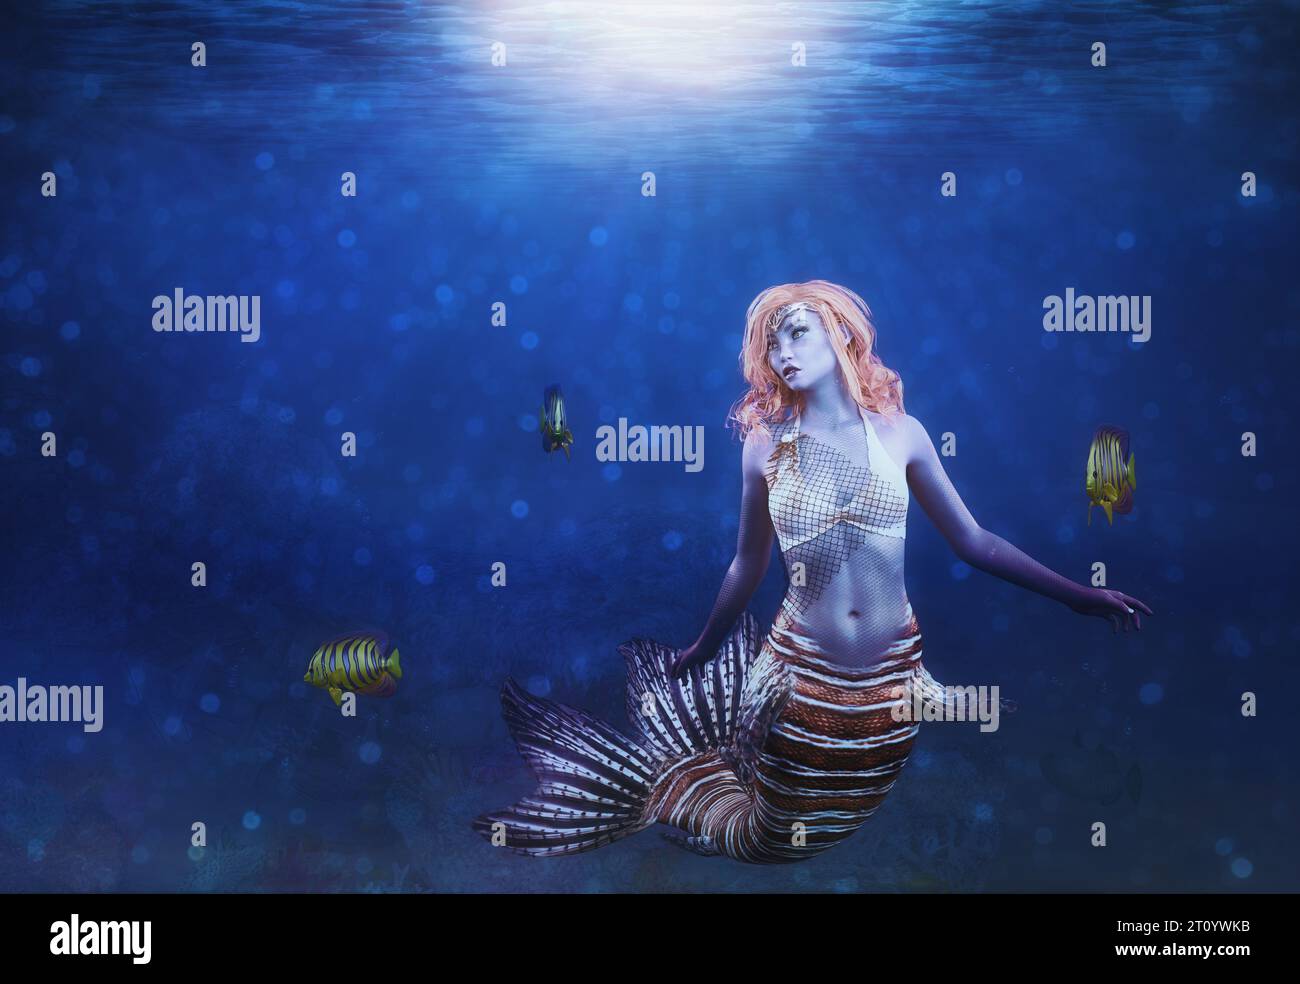 Dark underwater scene with coral reef and mermaid, 3D Illustration. Stock Photo